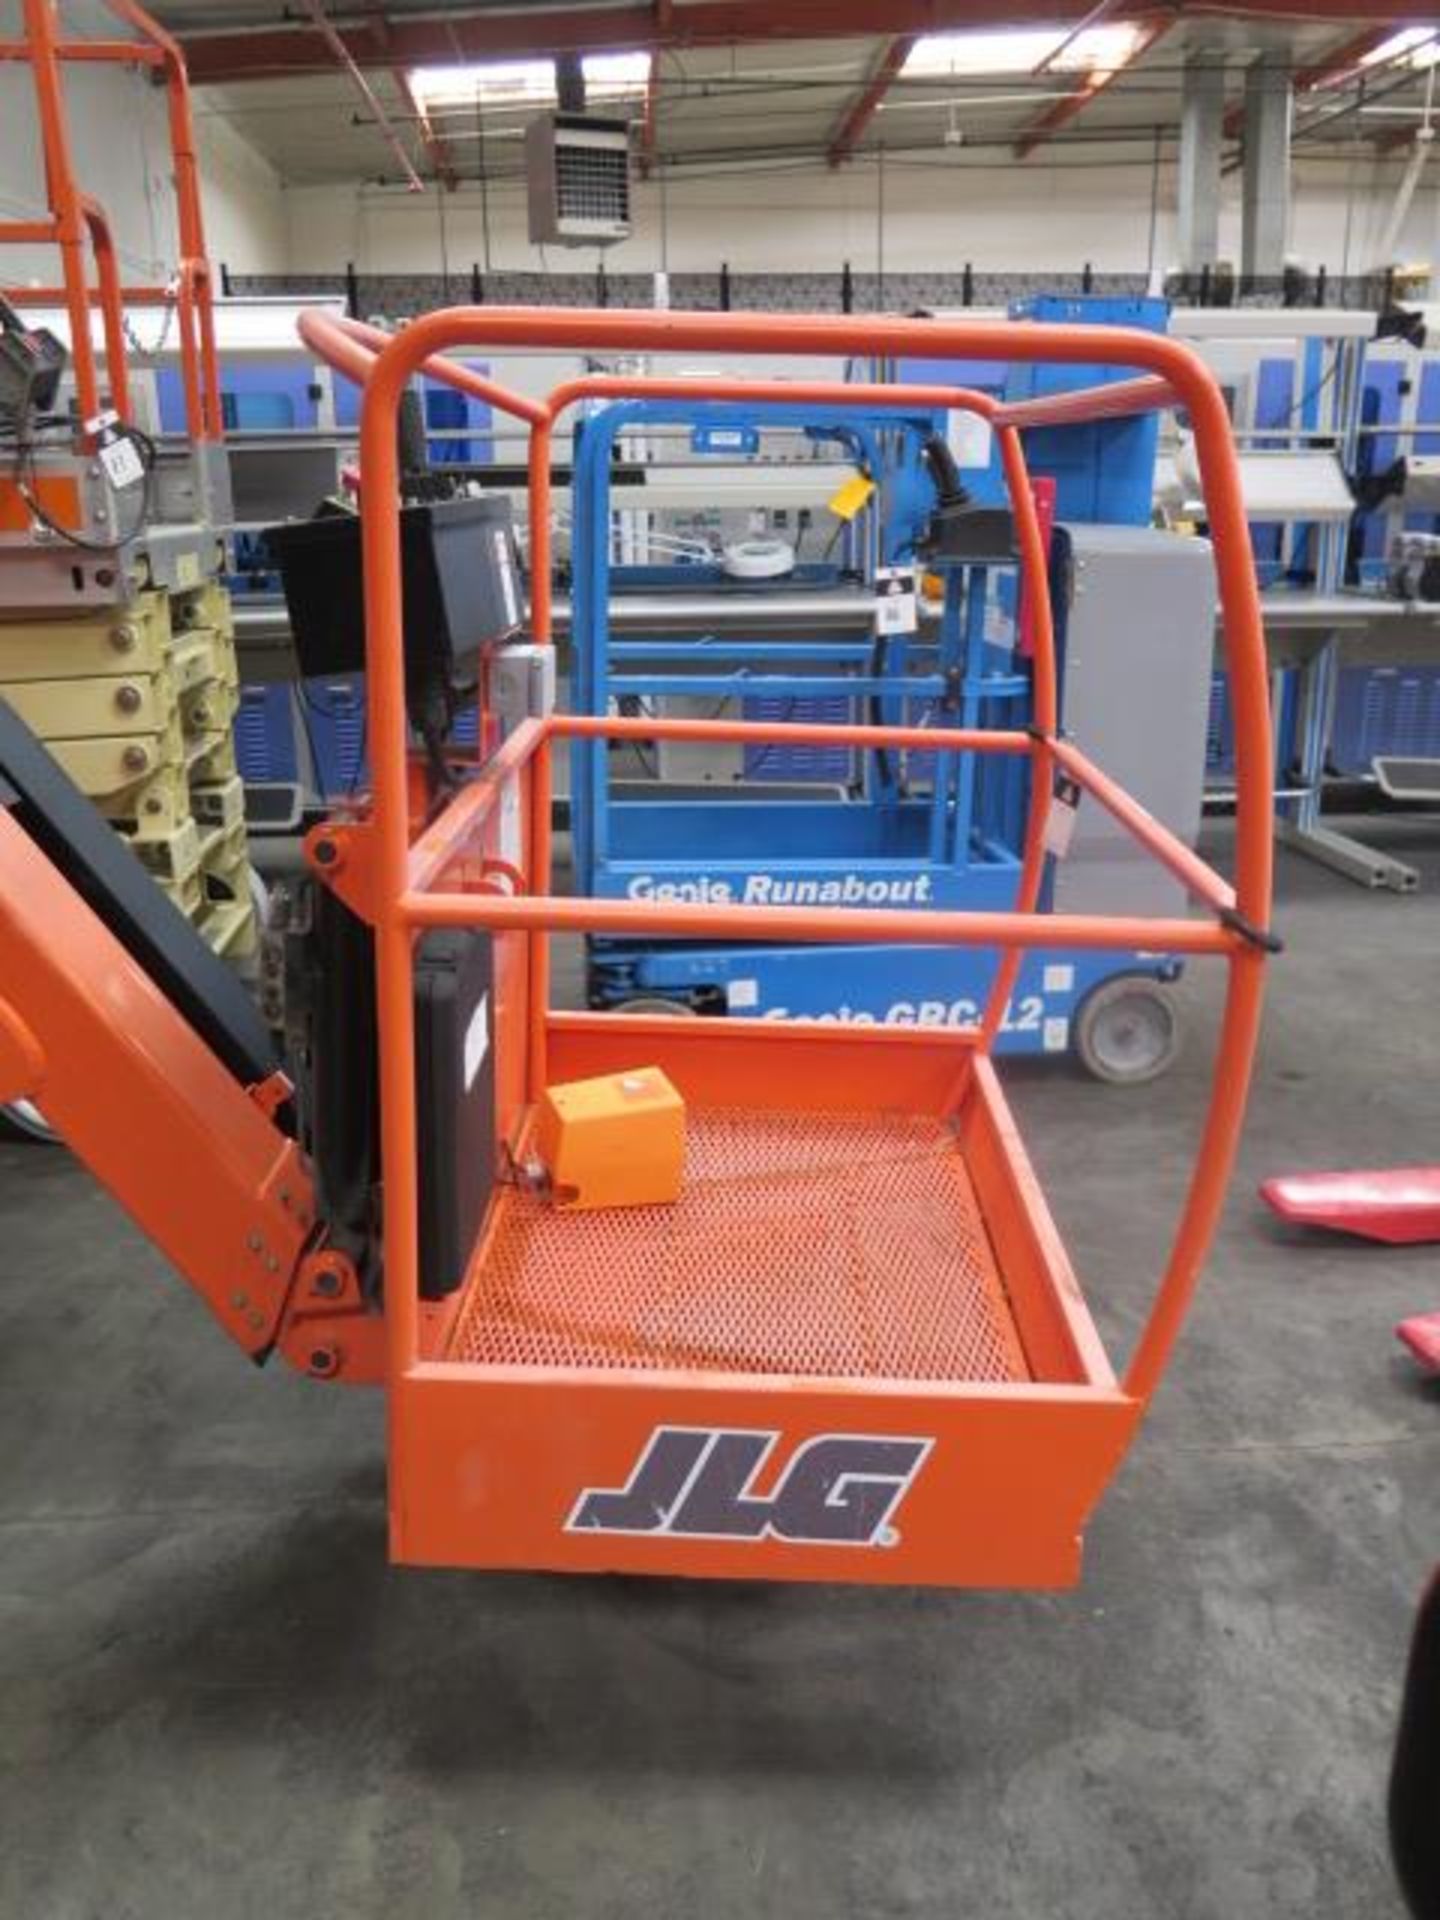 2013 JLG Toucan E33MJ Electric Boom Lift s/n A300052335 w/ 32.75' Max Platform Height, SOLD AS IS - Image 4 of 19